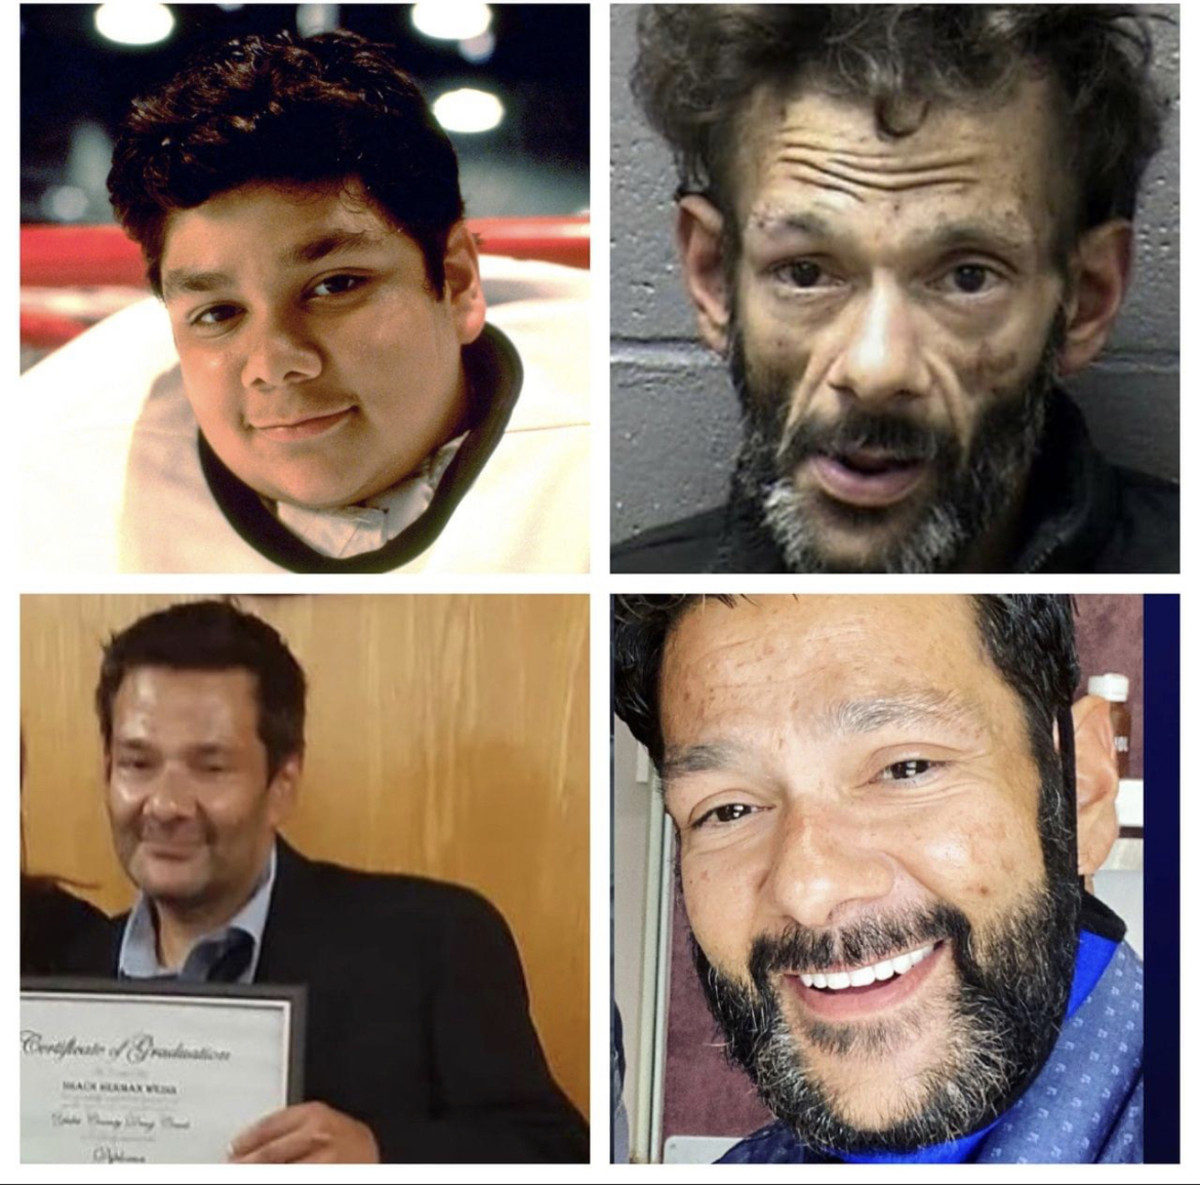 Way to go Goldberg!!. 18 months ago, the internet was making fun of the mugshot of Mighty Ducks star Shaun Weiss. Last week, Shaun graduated drug court and has 